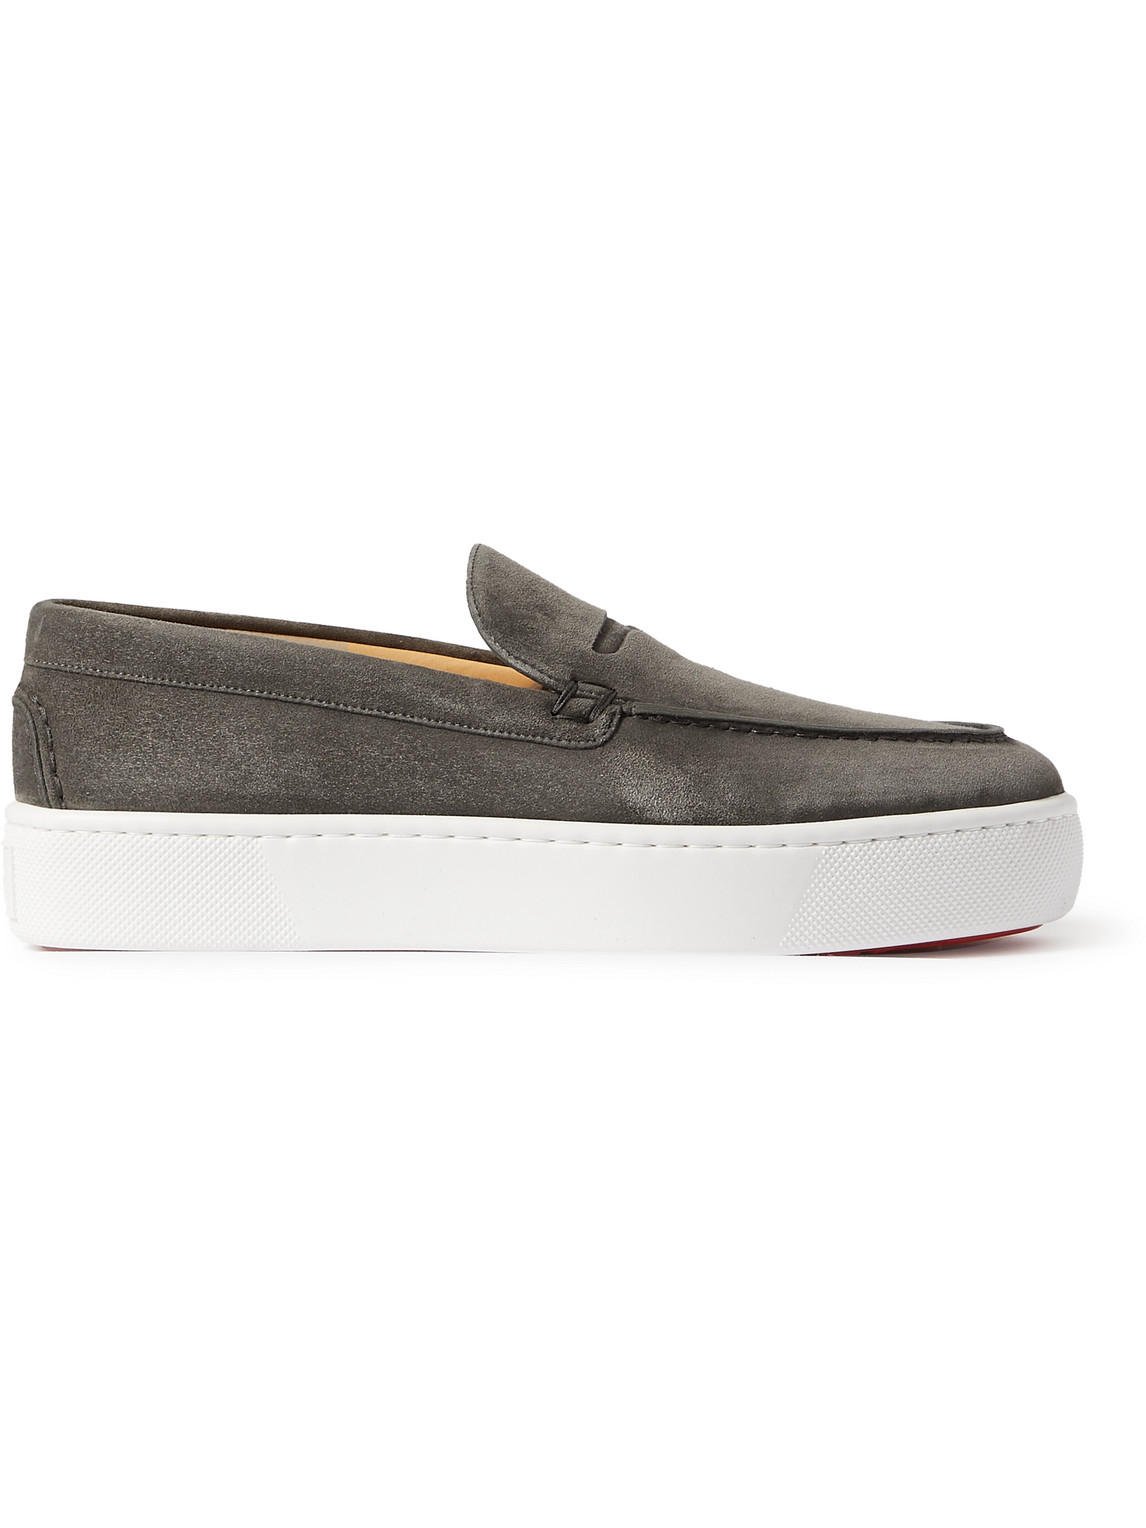 CHRISTIAN LOUBOUTIN PAQUEBOAT SUEDE PENNY LOAFERS